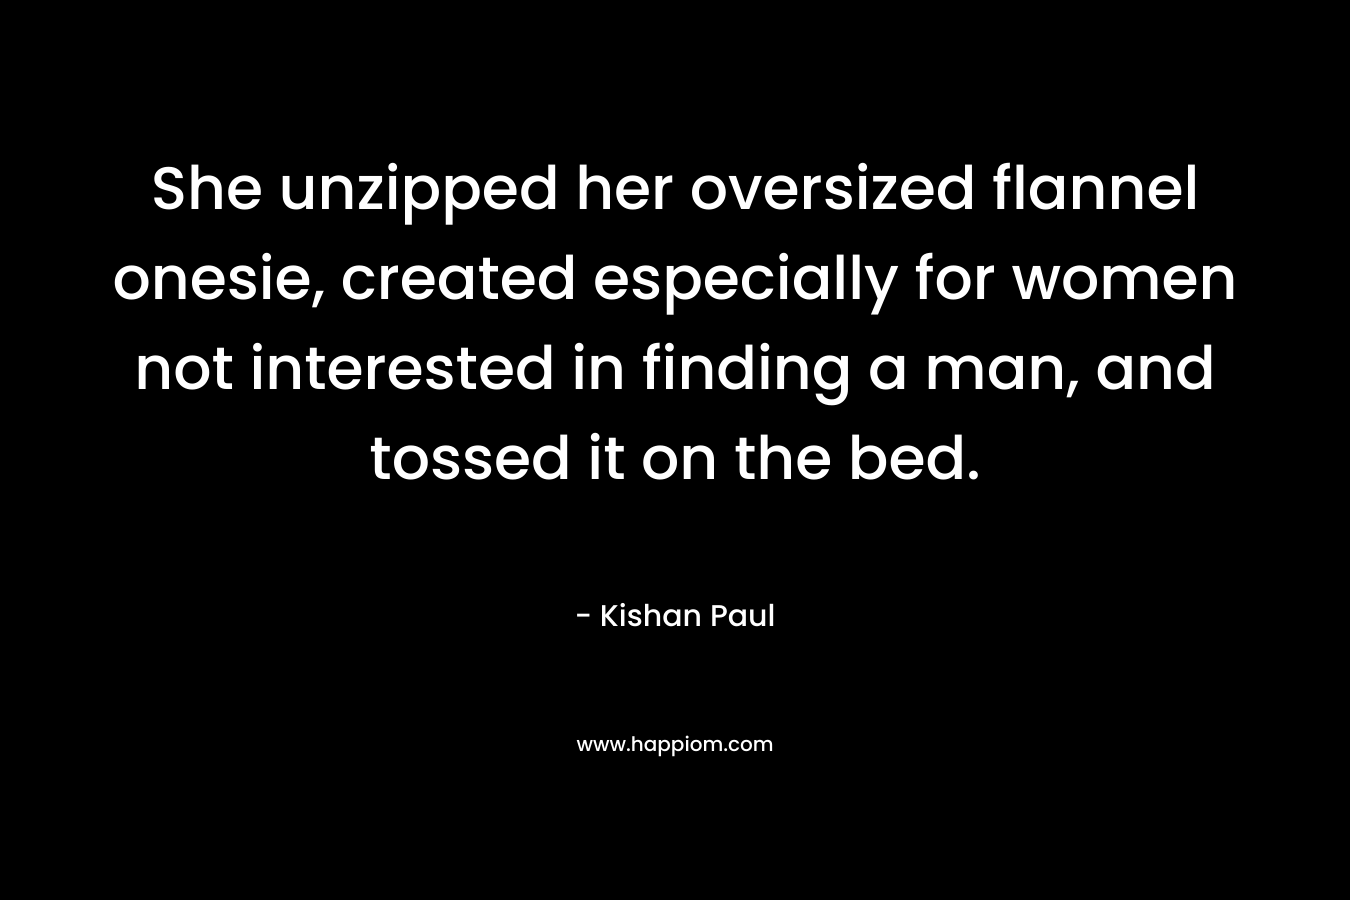 She unzipped her oversized flannel onesie, created especially for women not interested in finding a man, and tossed it on the bed. – Kishan Paul